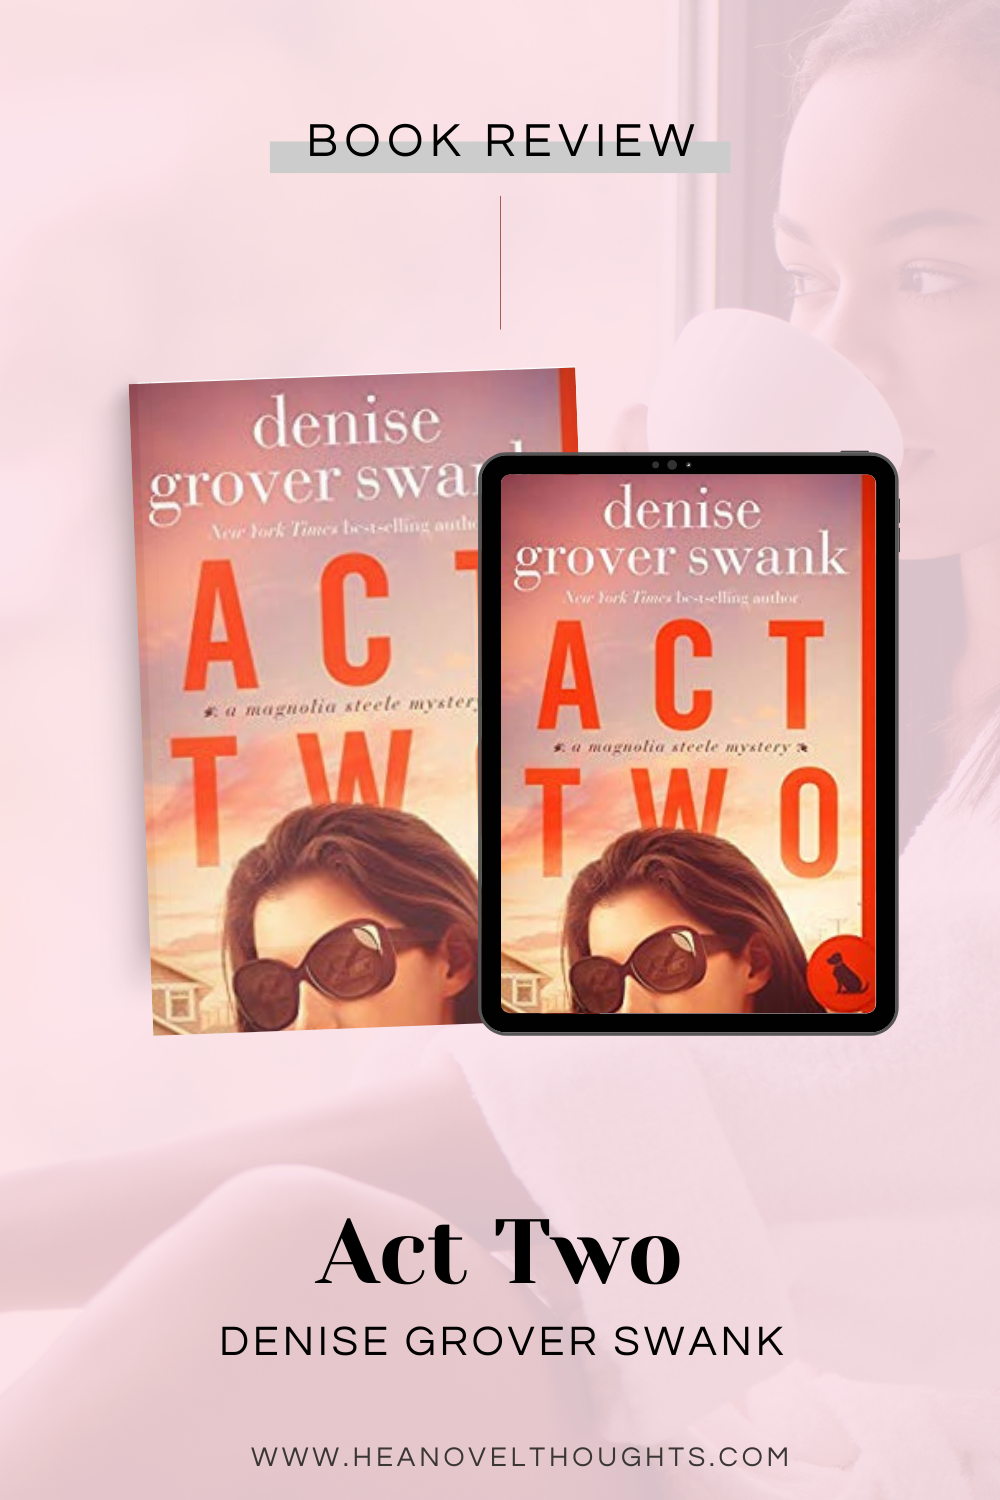 Act Two by Denise Grover Swank